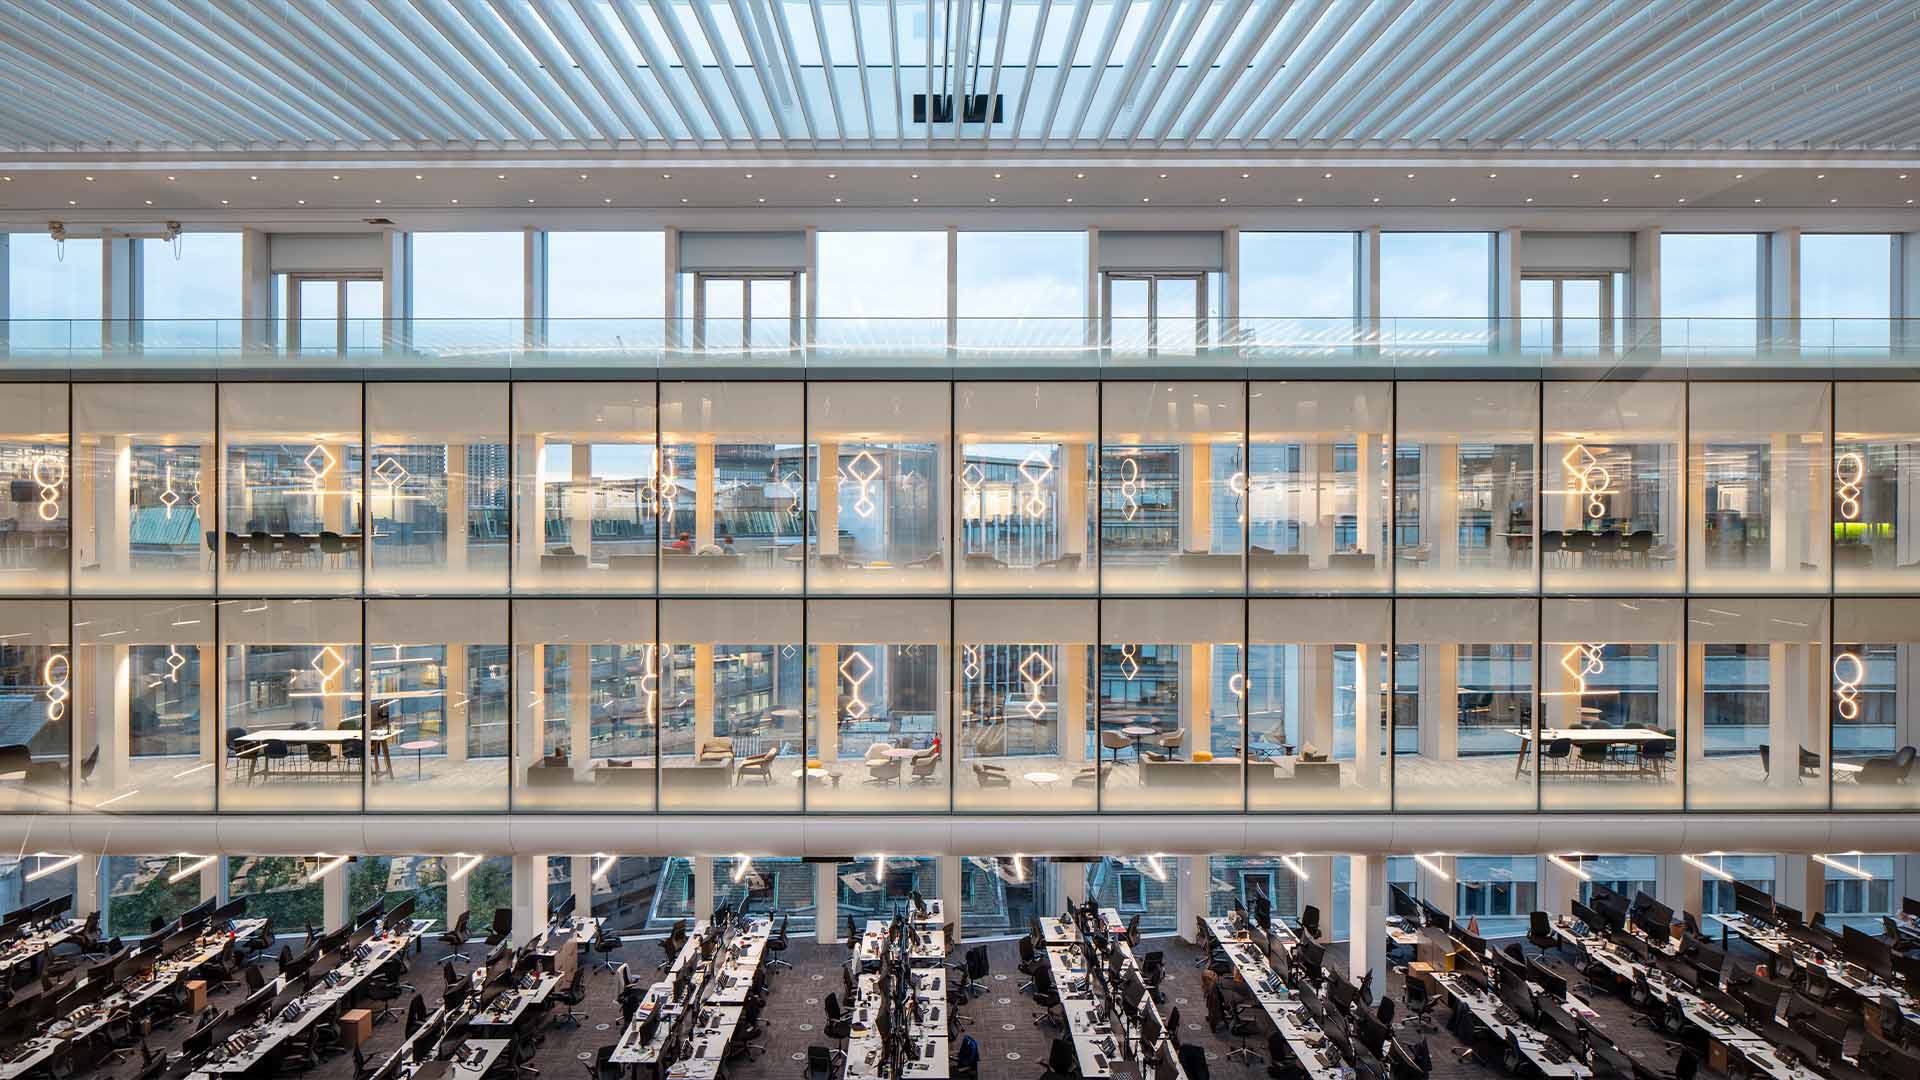 Enabling Goldman Sachs to consolidate all London employees into one 1.2 million square foot, BREEAM Excellent rated headquarters, Plumtree Court won the award for Best Corporate Workplace.